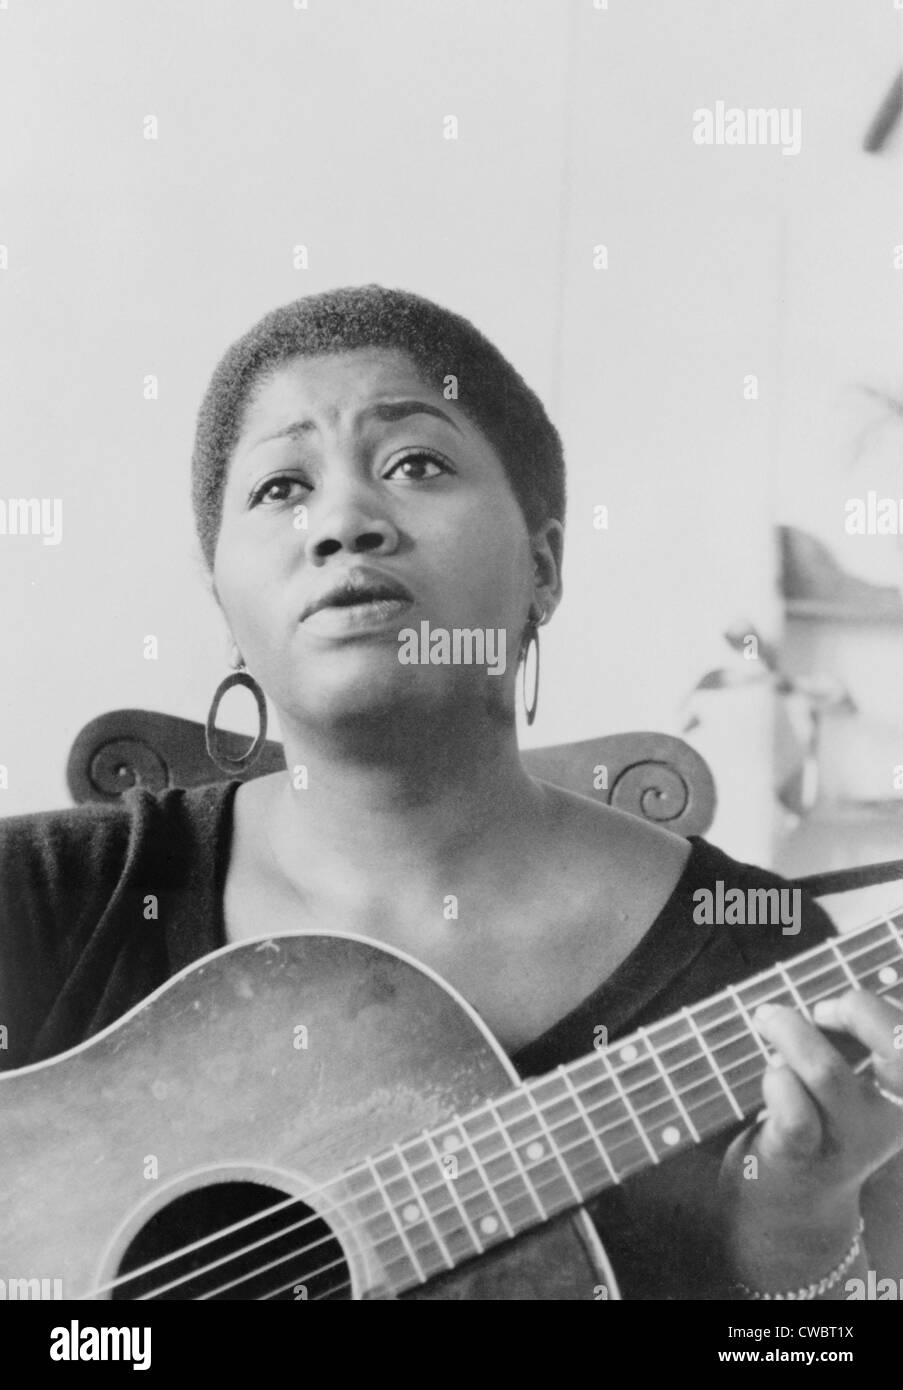 Odetta Holmes (1930-2008), African American folk and blues singer was called 'The Voice of the Civil Rights Movement.' Ca. 1965. Stock Photo